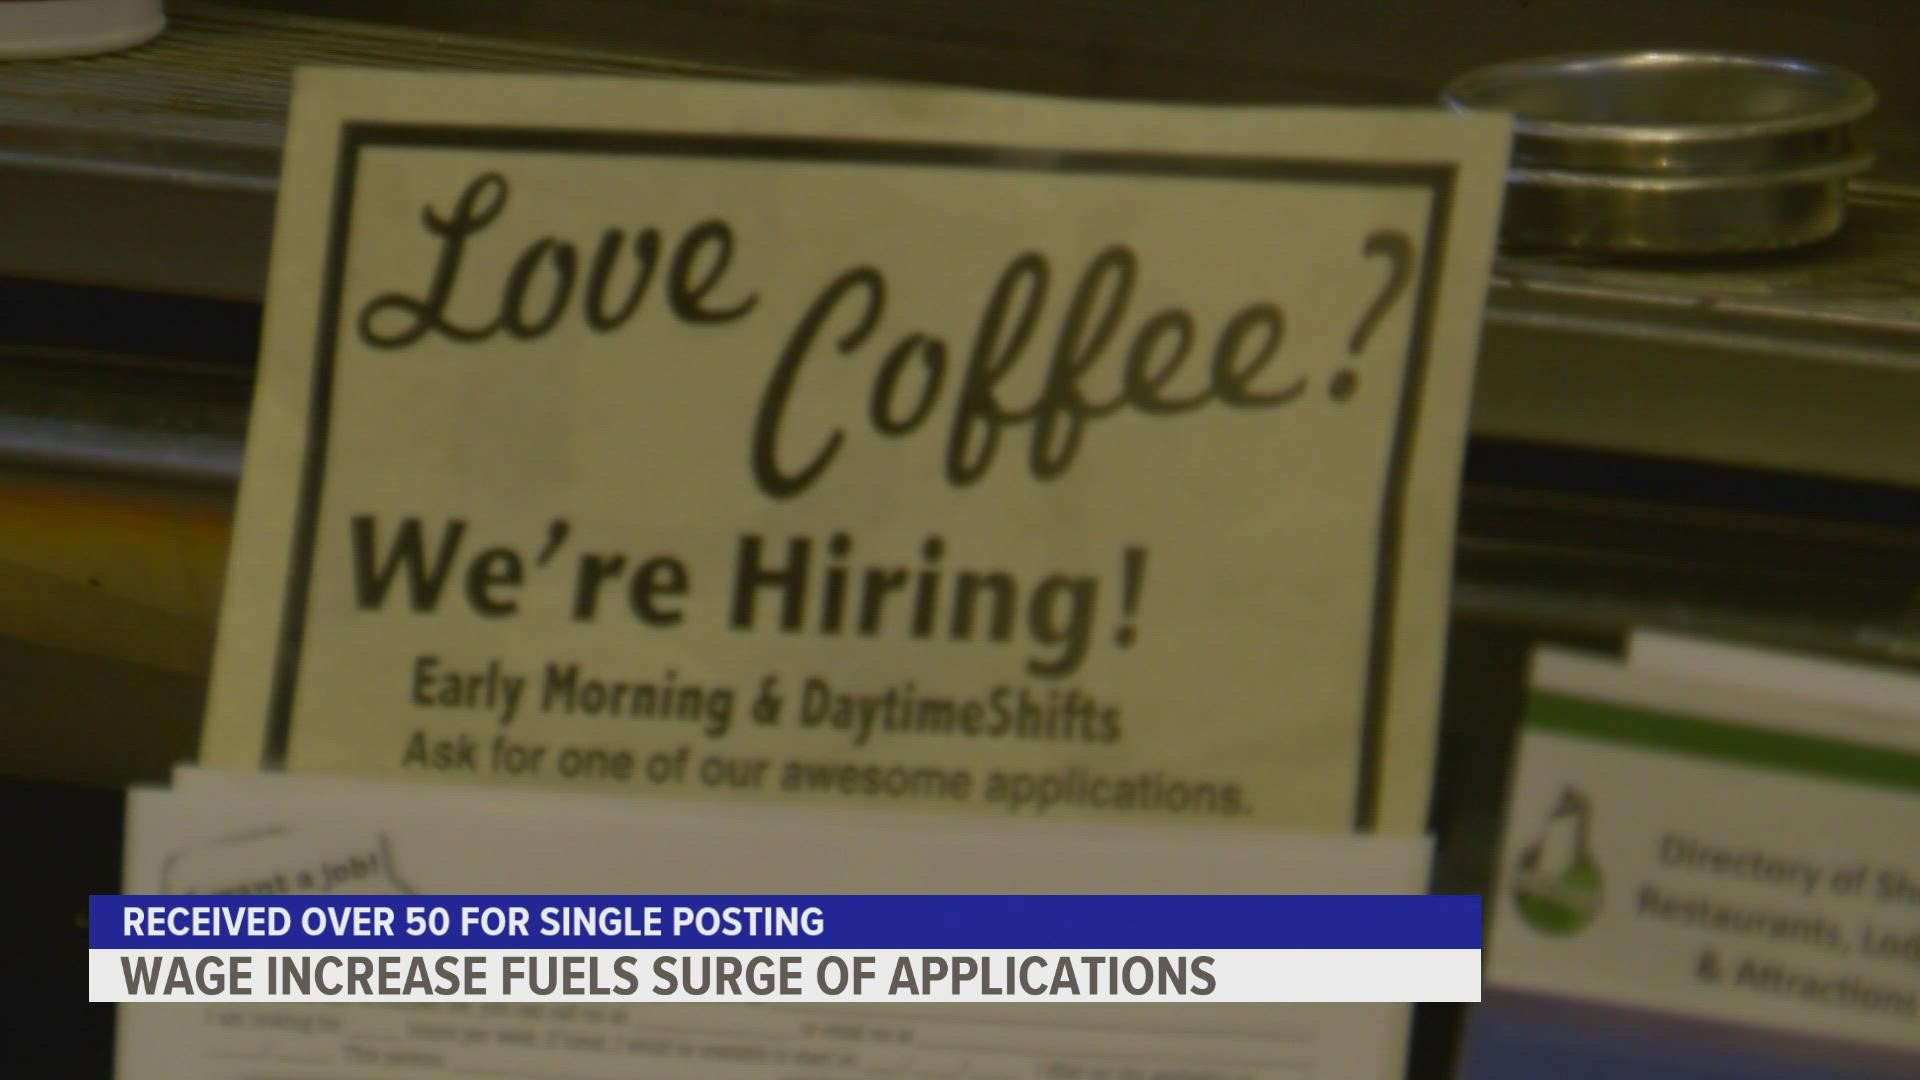 Greene Bean Coffee has received over 50 applications for their latest opening.